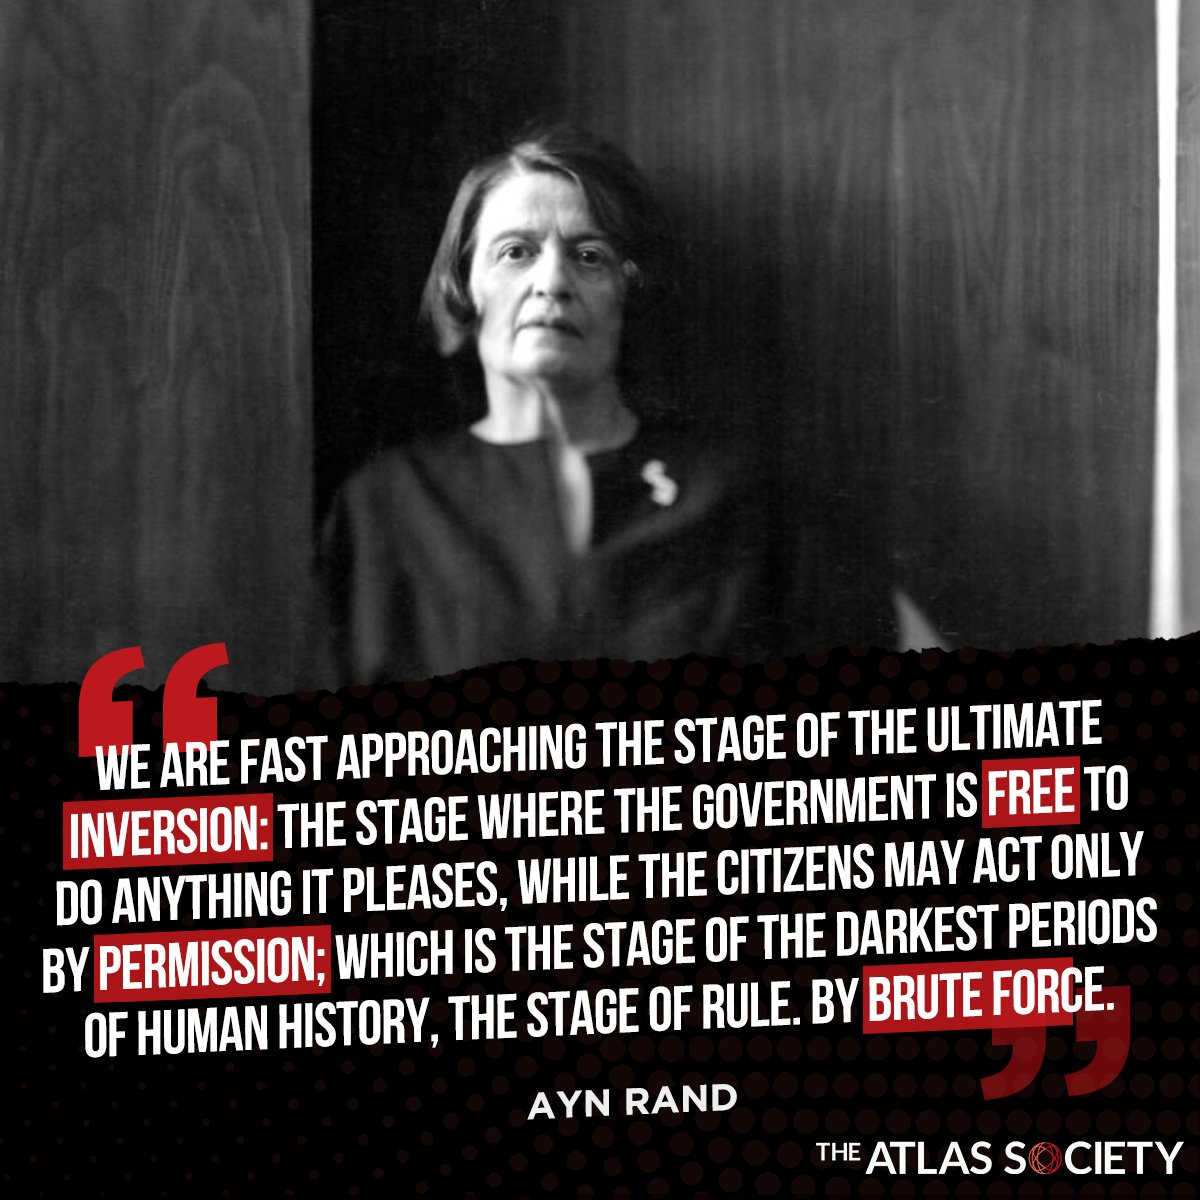 Your rights are slowly being taken from you, soon it will be too late! #ShrinkGovernment #AtlasShrugged #AynRand youtube.com/watch?v=Z0bids…